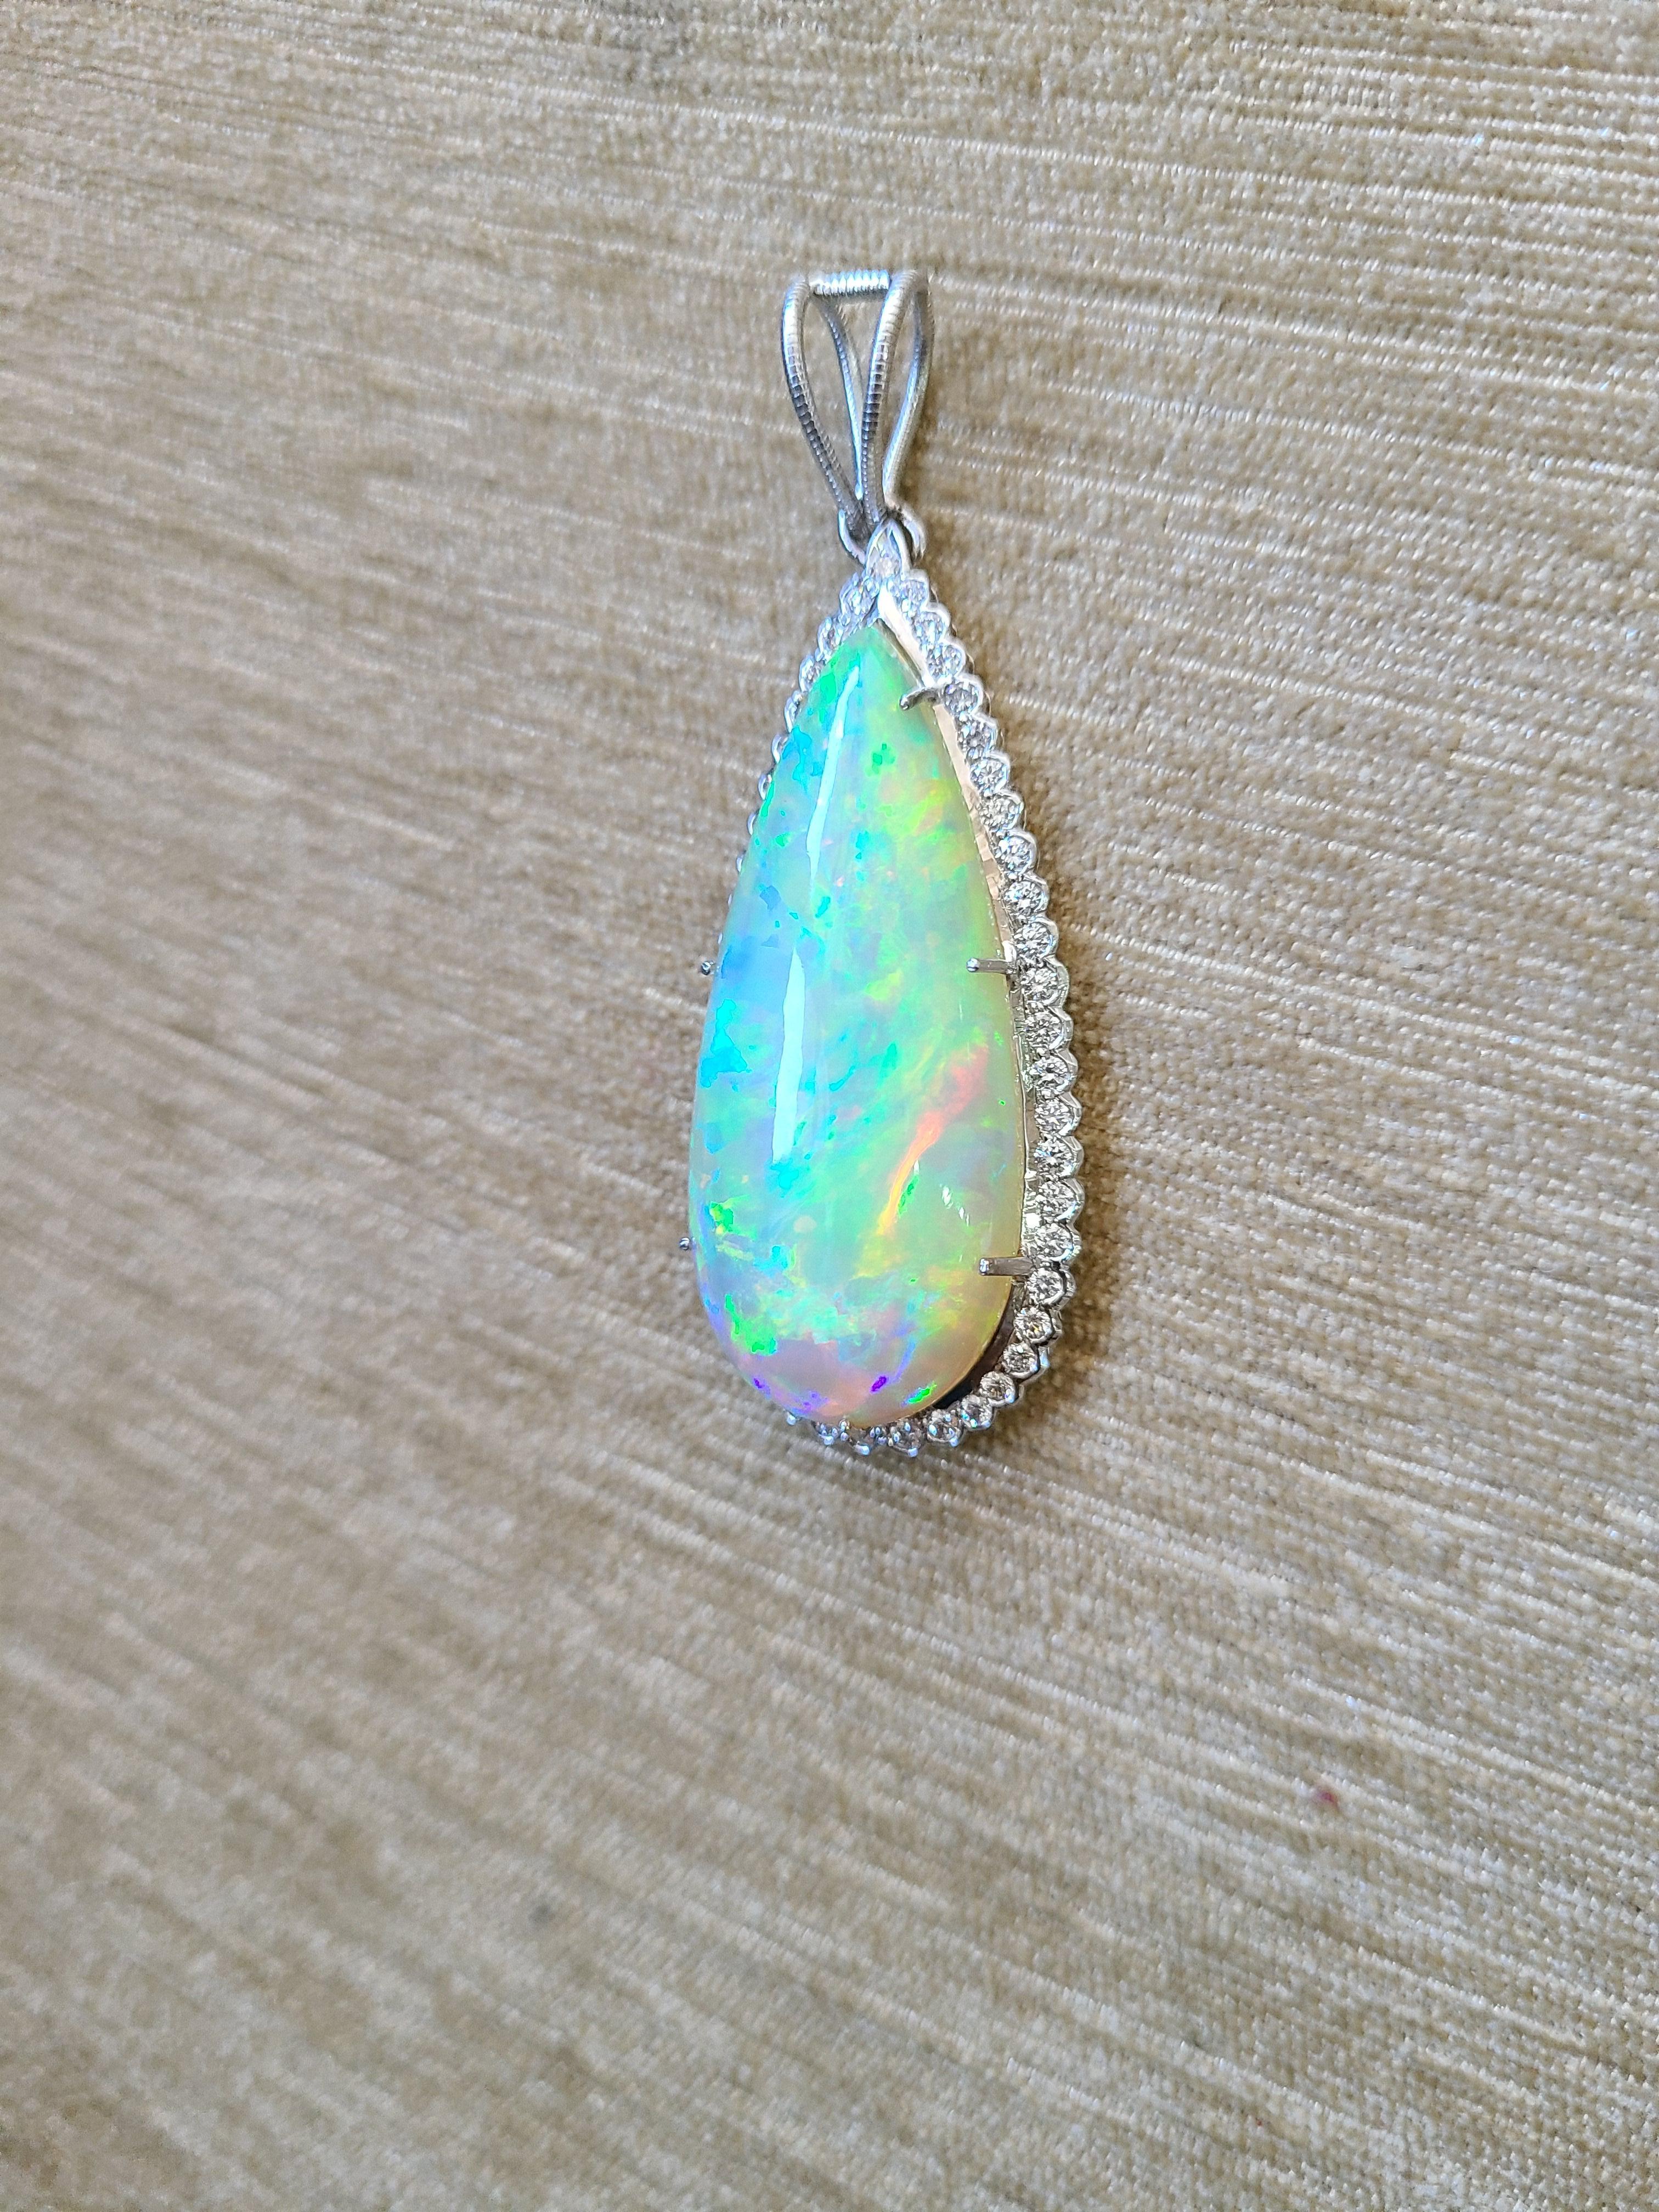 A chic opal pendant set in 18k white gold with diamonds. The natural opal is from Ethiopia and weight is 25.66 carats with diamond weight .78 carats. The pendant dimensions in cm 6 x 2.5 x .7 (LXWXD)